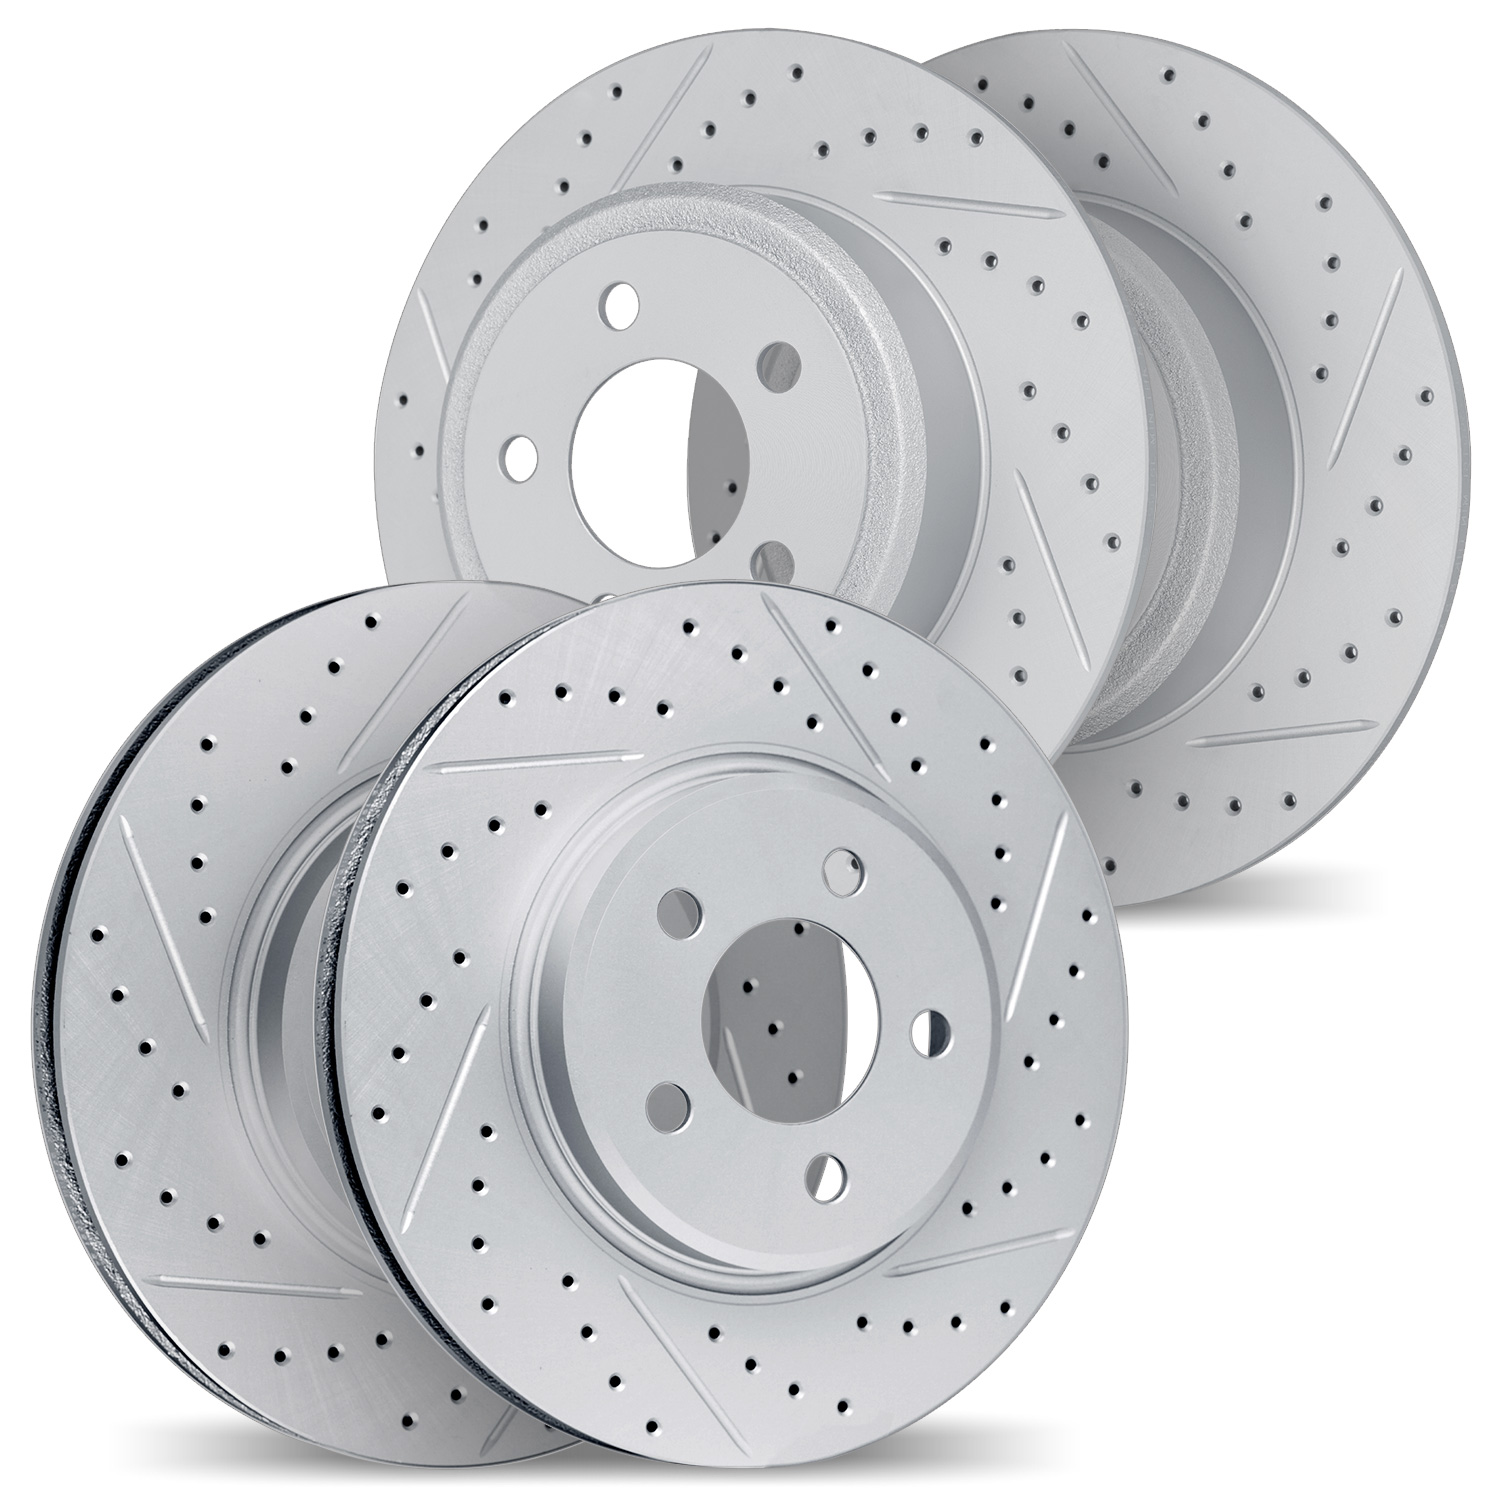 2004-03021 Geoperformance Drilled/Slotted Brake Rotors, Fits Select Kia/Hyundai/Genesis, Position: Front and Rear